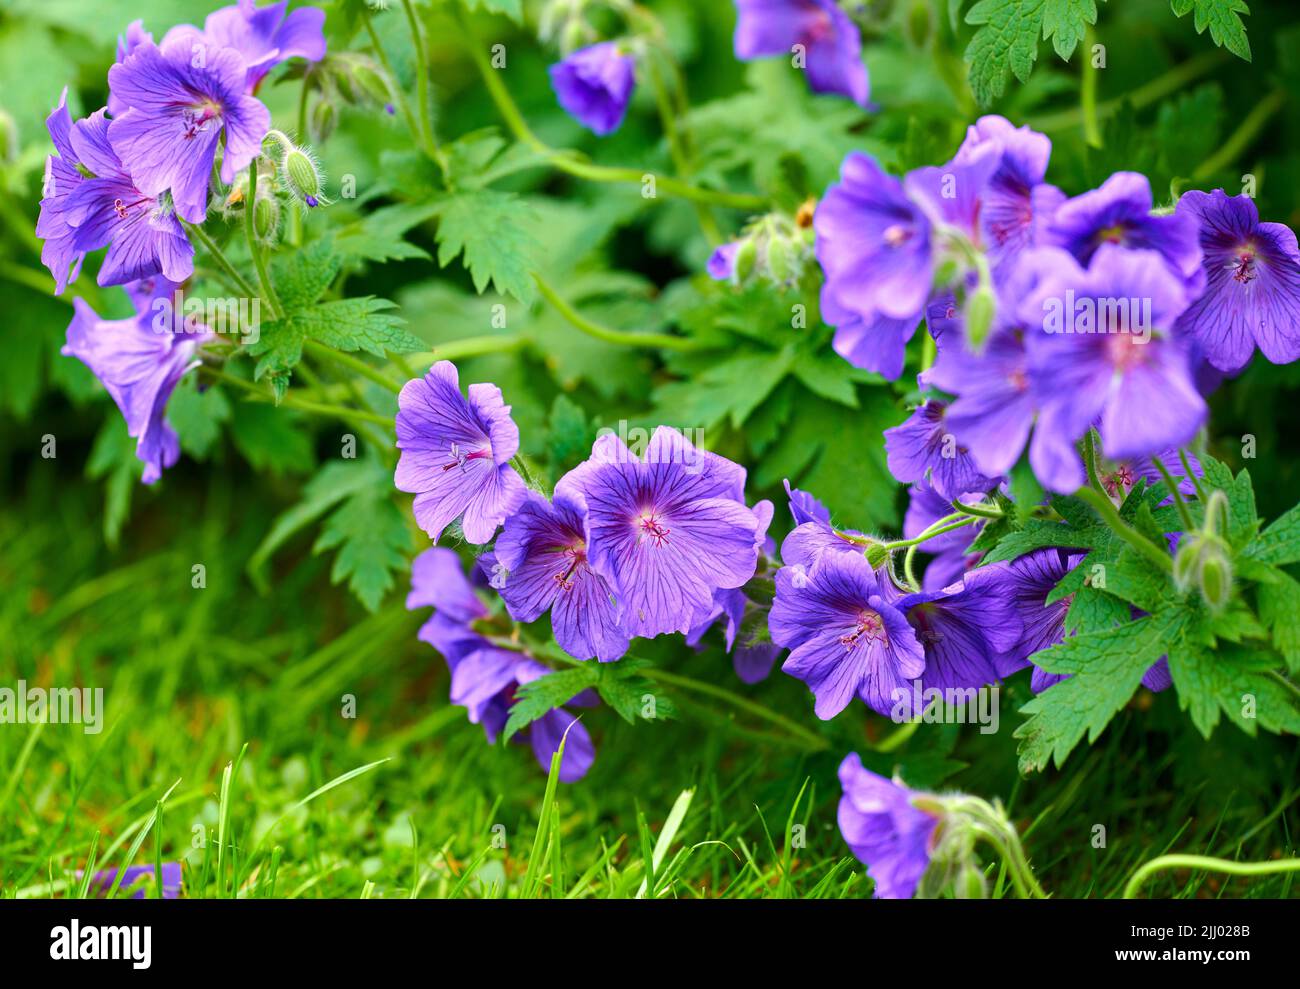 Purple hardy geranium flowers growing outside in a park. Bush of indigo or blue geraniums blooming in a lush garden or backyard in spring. Delicate Stock Photo